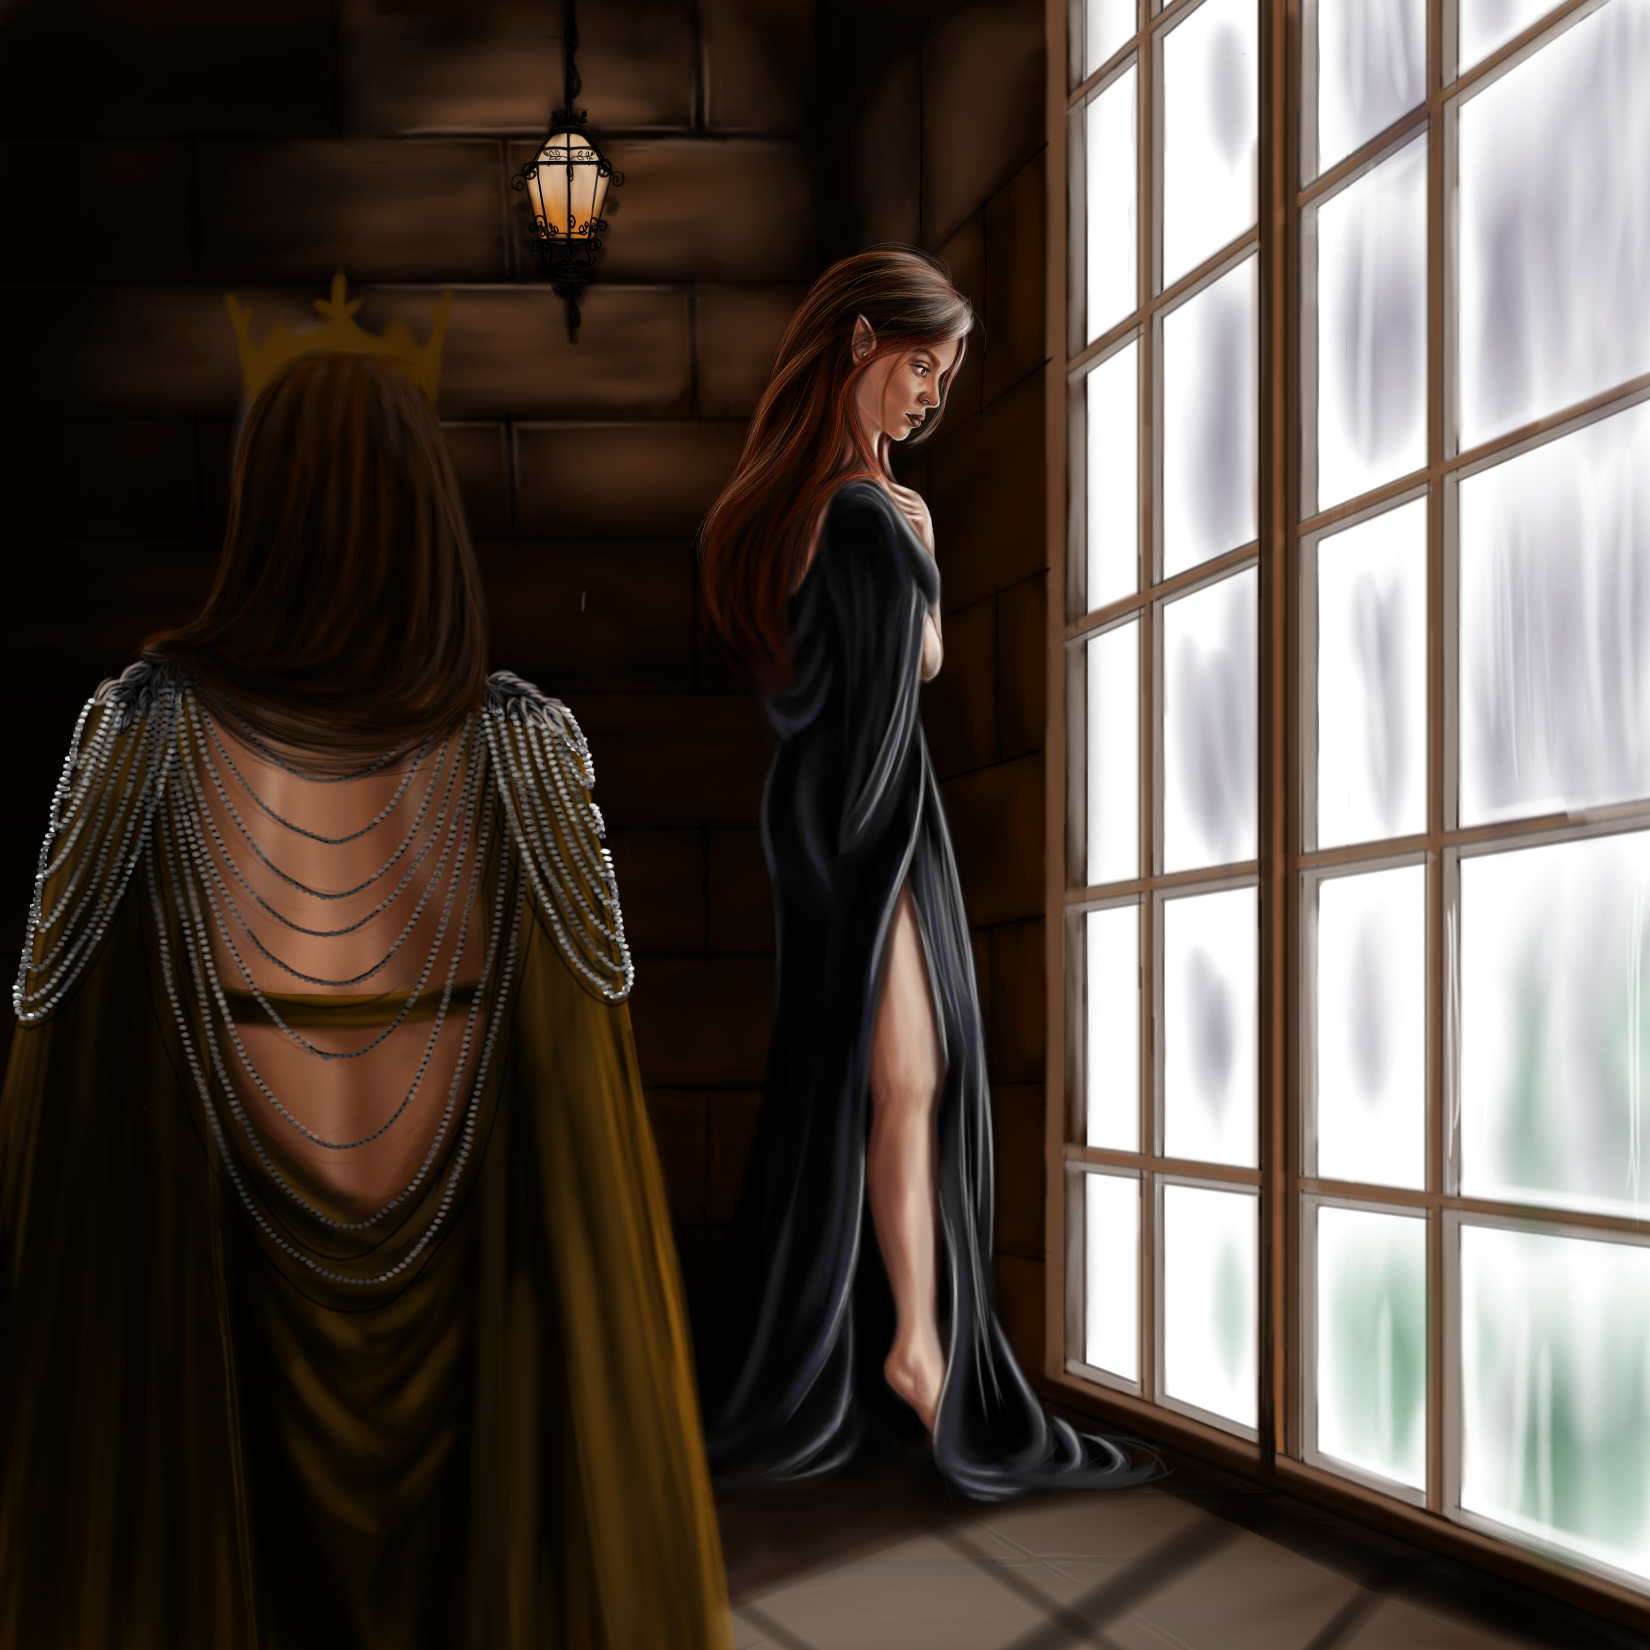 Francisftlp-Digital Drawing-The meeting with the Priestess-Step 6.png